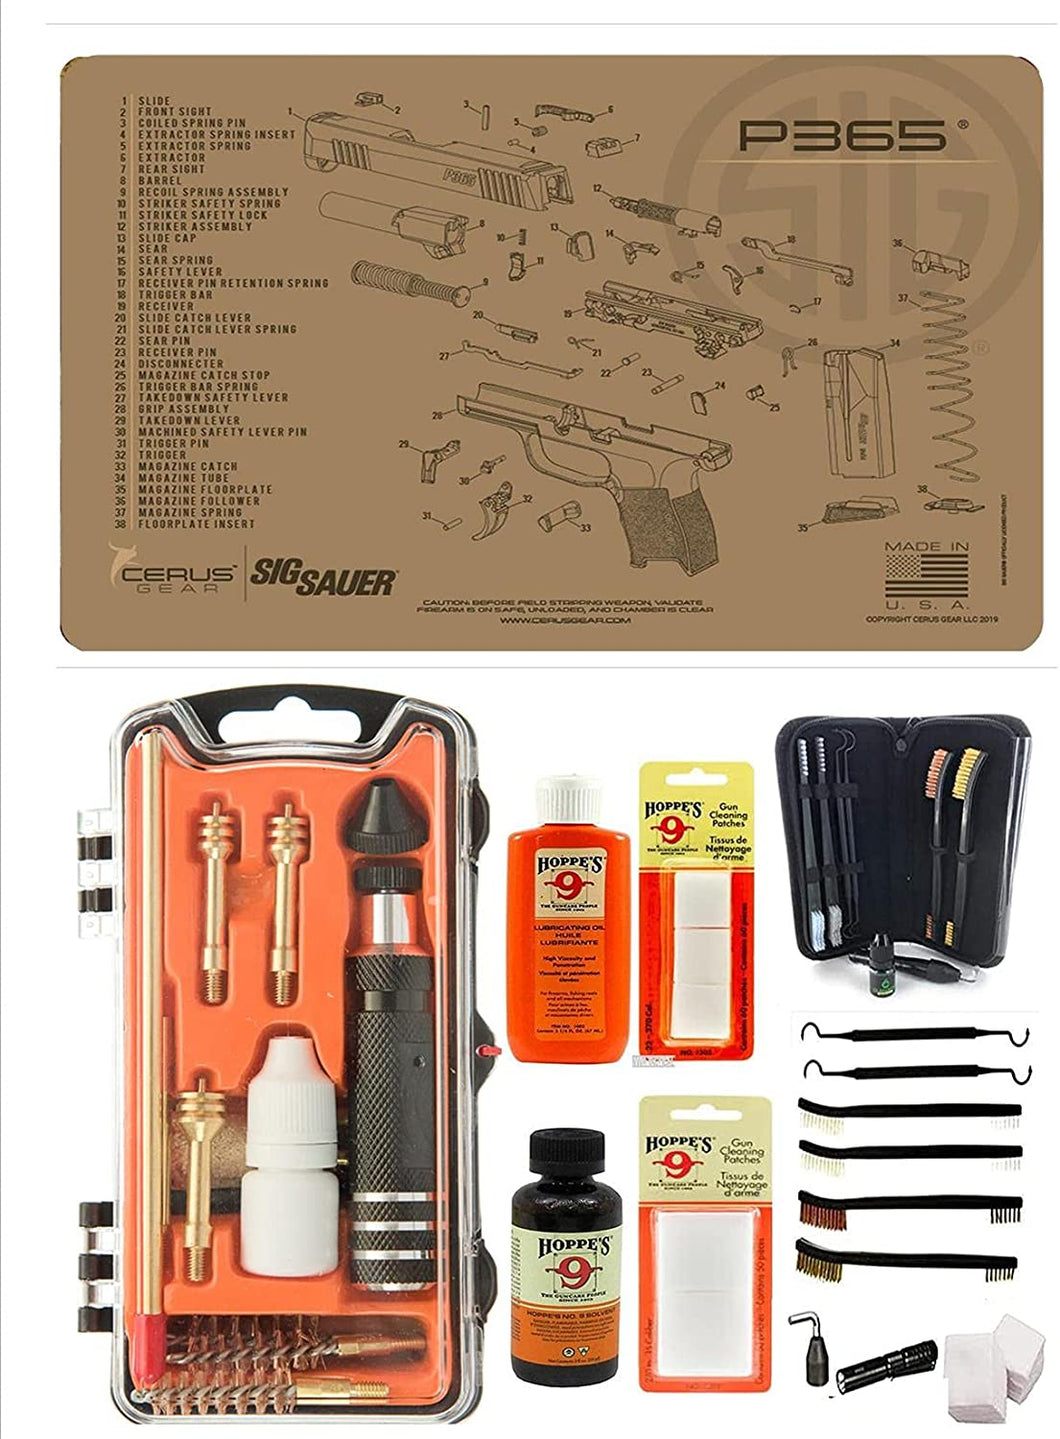 EDOG USA Outlaw 28 Pc Pistol Cleaning Kit - Compatible for Sig Sauer P365 Tan Flat Dark Earth - Schematic (Exploded View) Mat, Calibers 9MM to .45 & Tac Pak Pistol Cleaning Essentials Kit